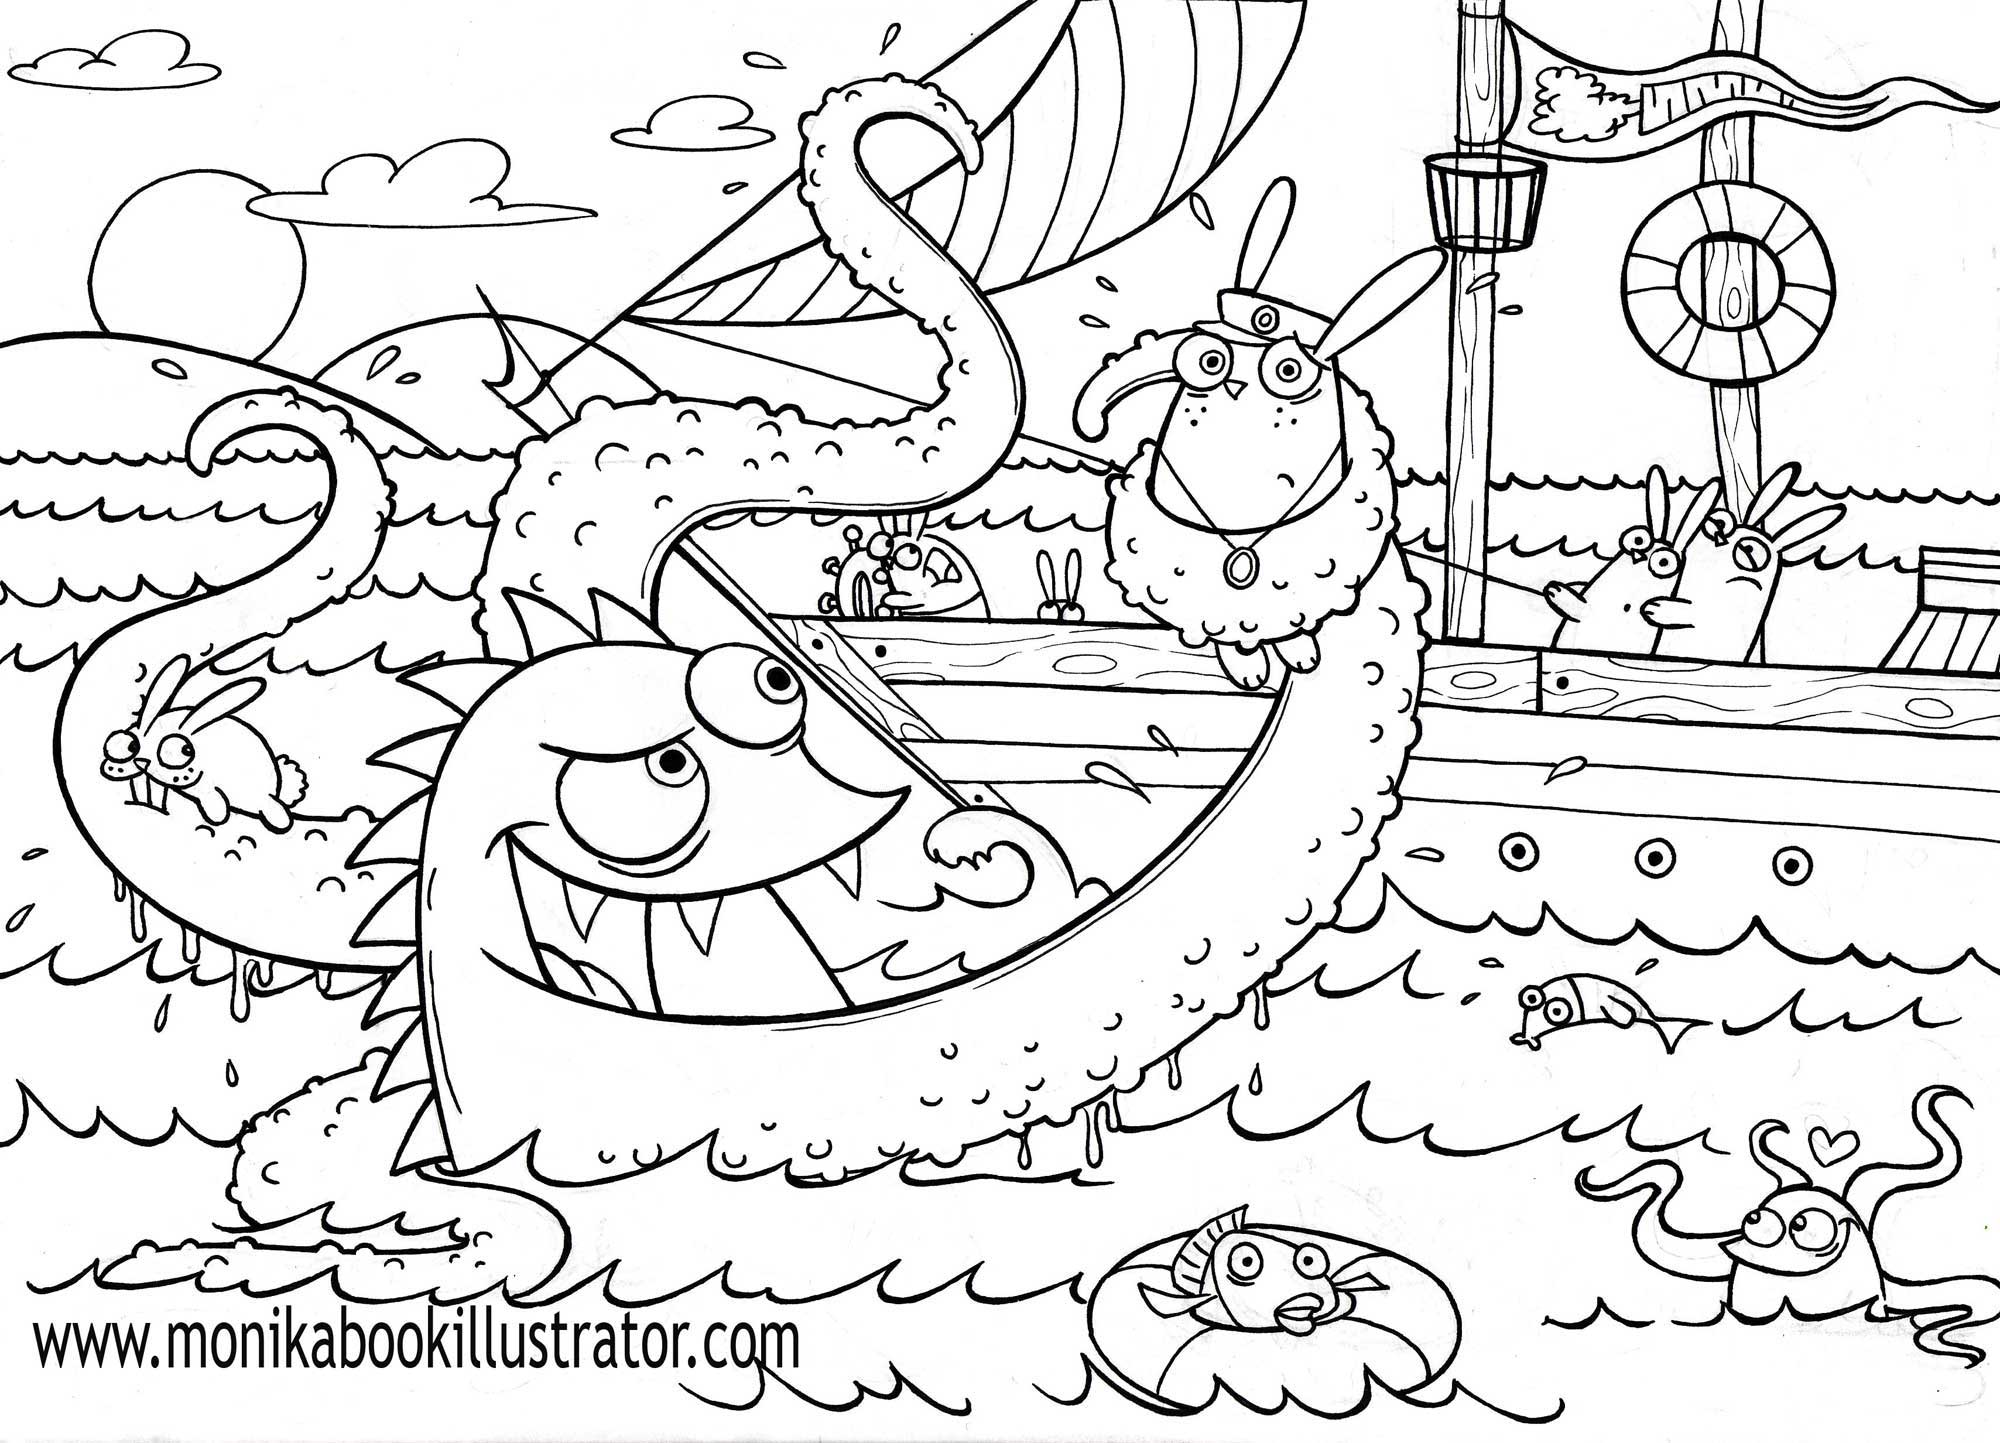 Monsters Coloring Page - Coloring Home